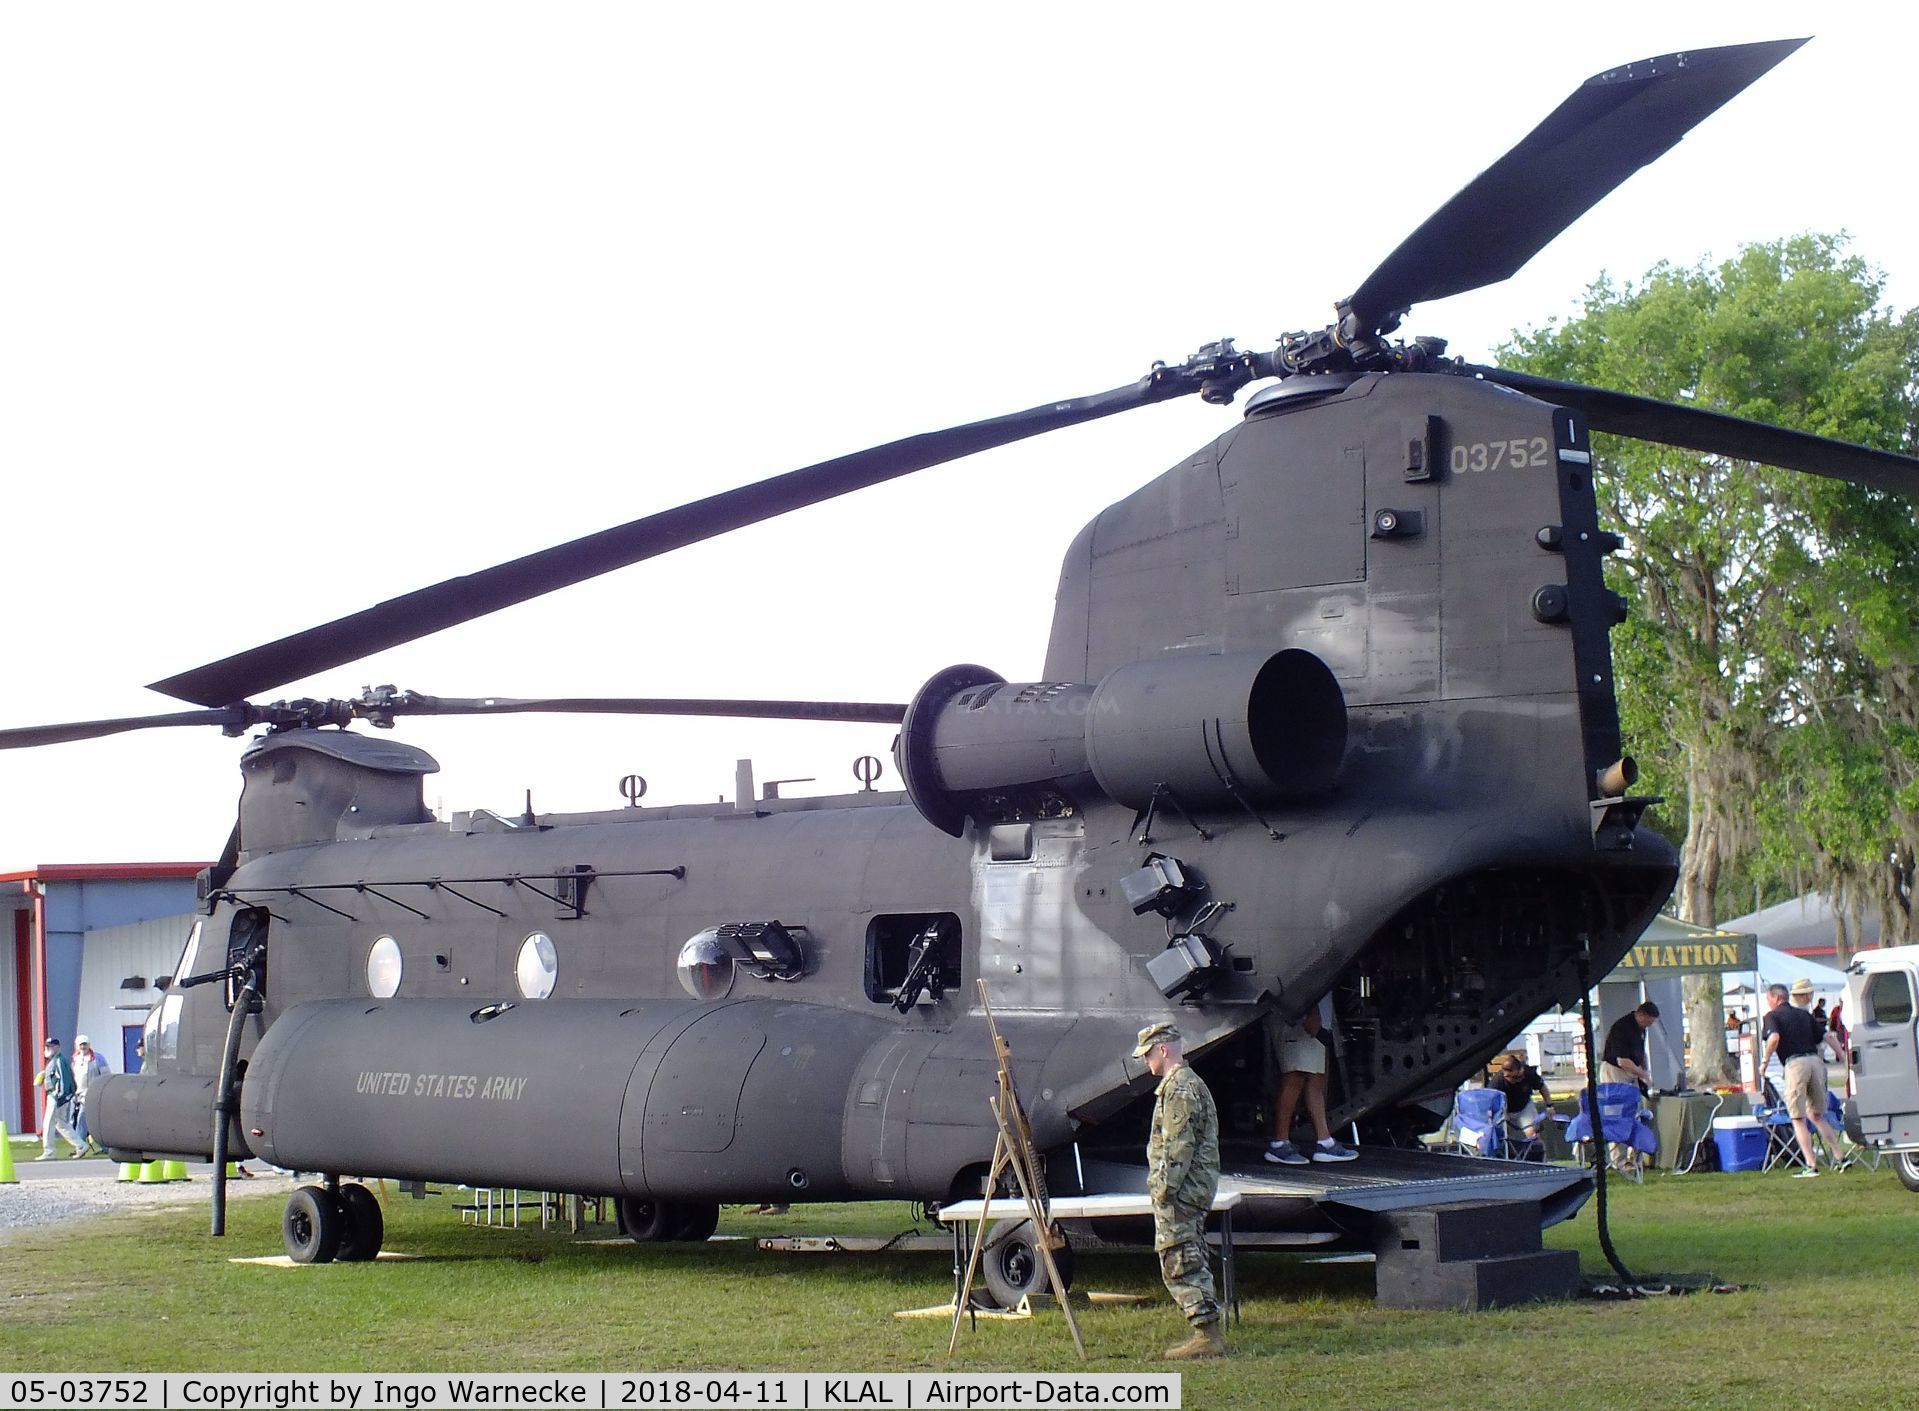 05-03752, 1981 Boeing MH-47G Chinook C/N M.3752, Boeing MH-47G Chinook of the US Army at 2018 Sun 'n Fun, Lakeland FL